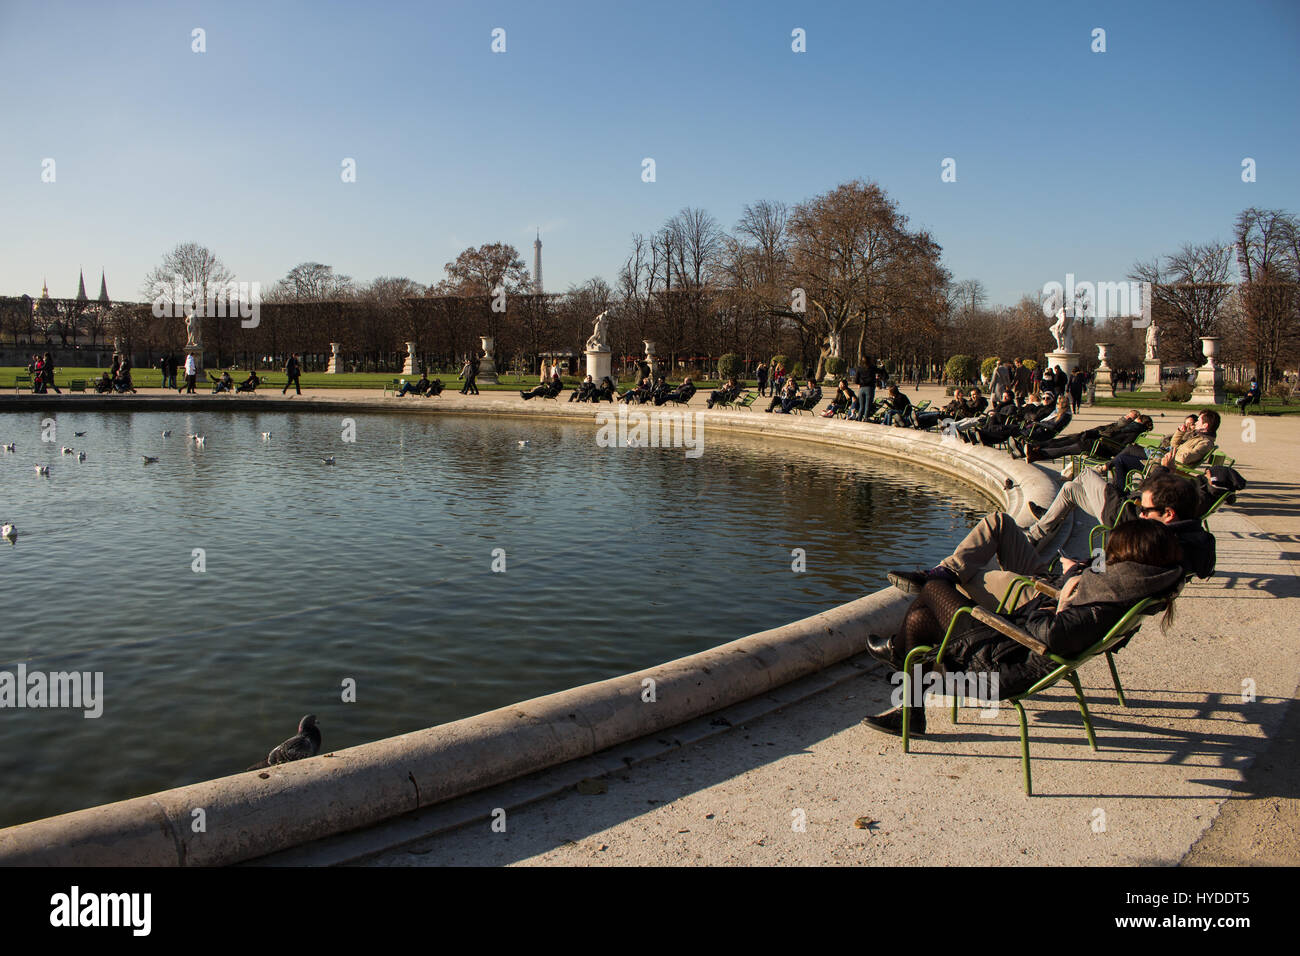 People relaxing and enjoying a sunny day in Jardin des Tuileries near musée du Louvre and Champs Elysées, Paris, France Stock Photo